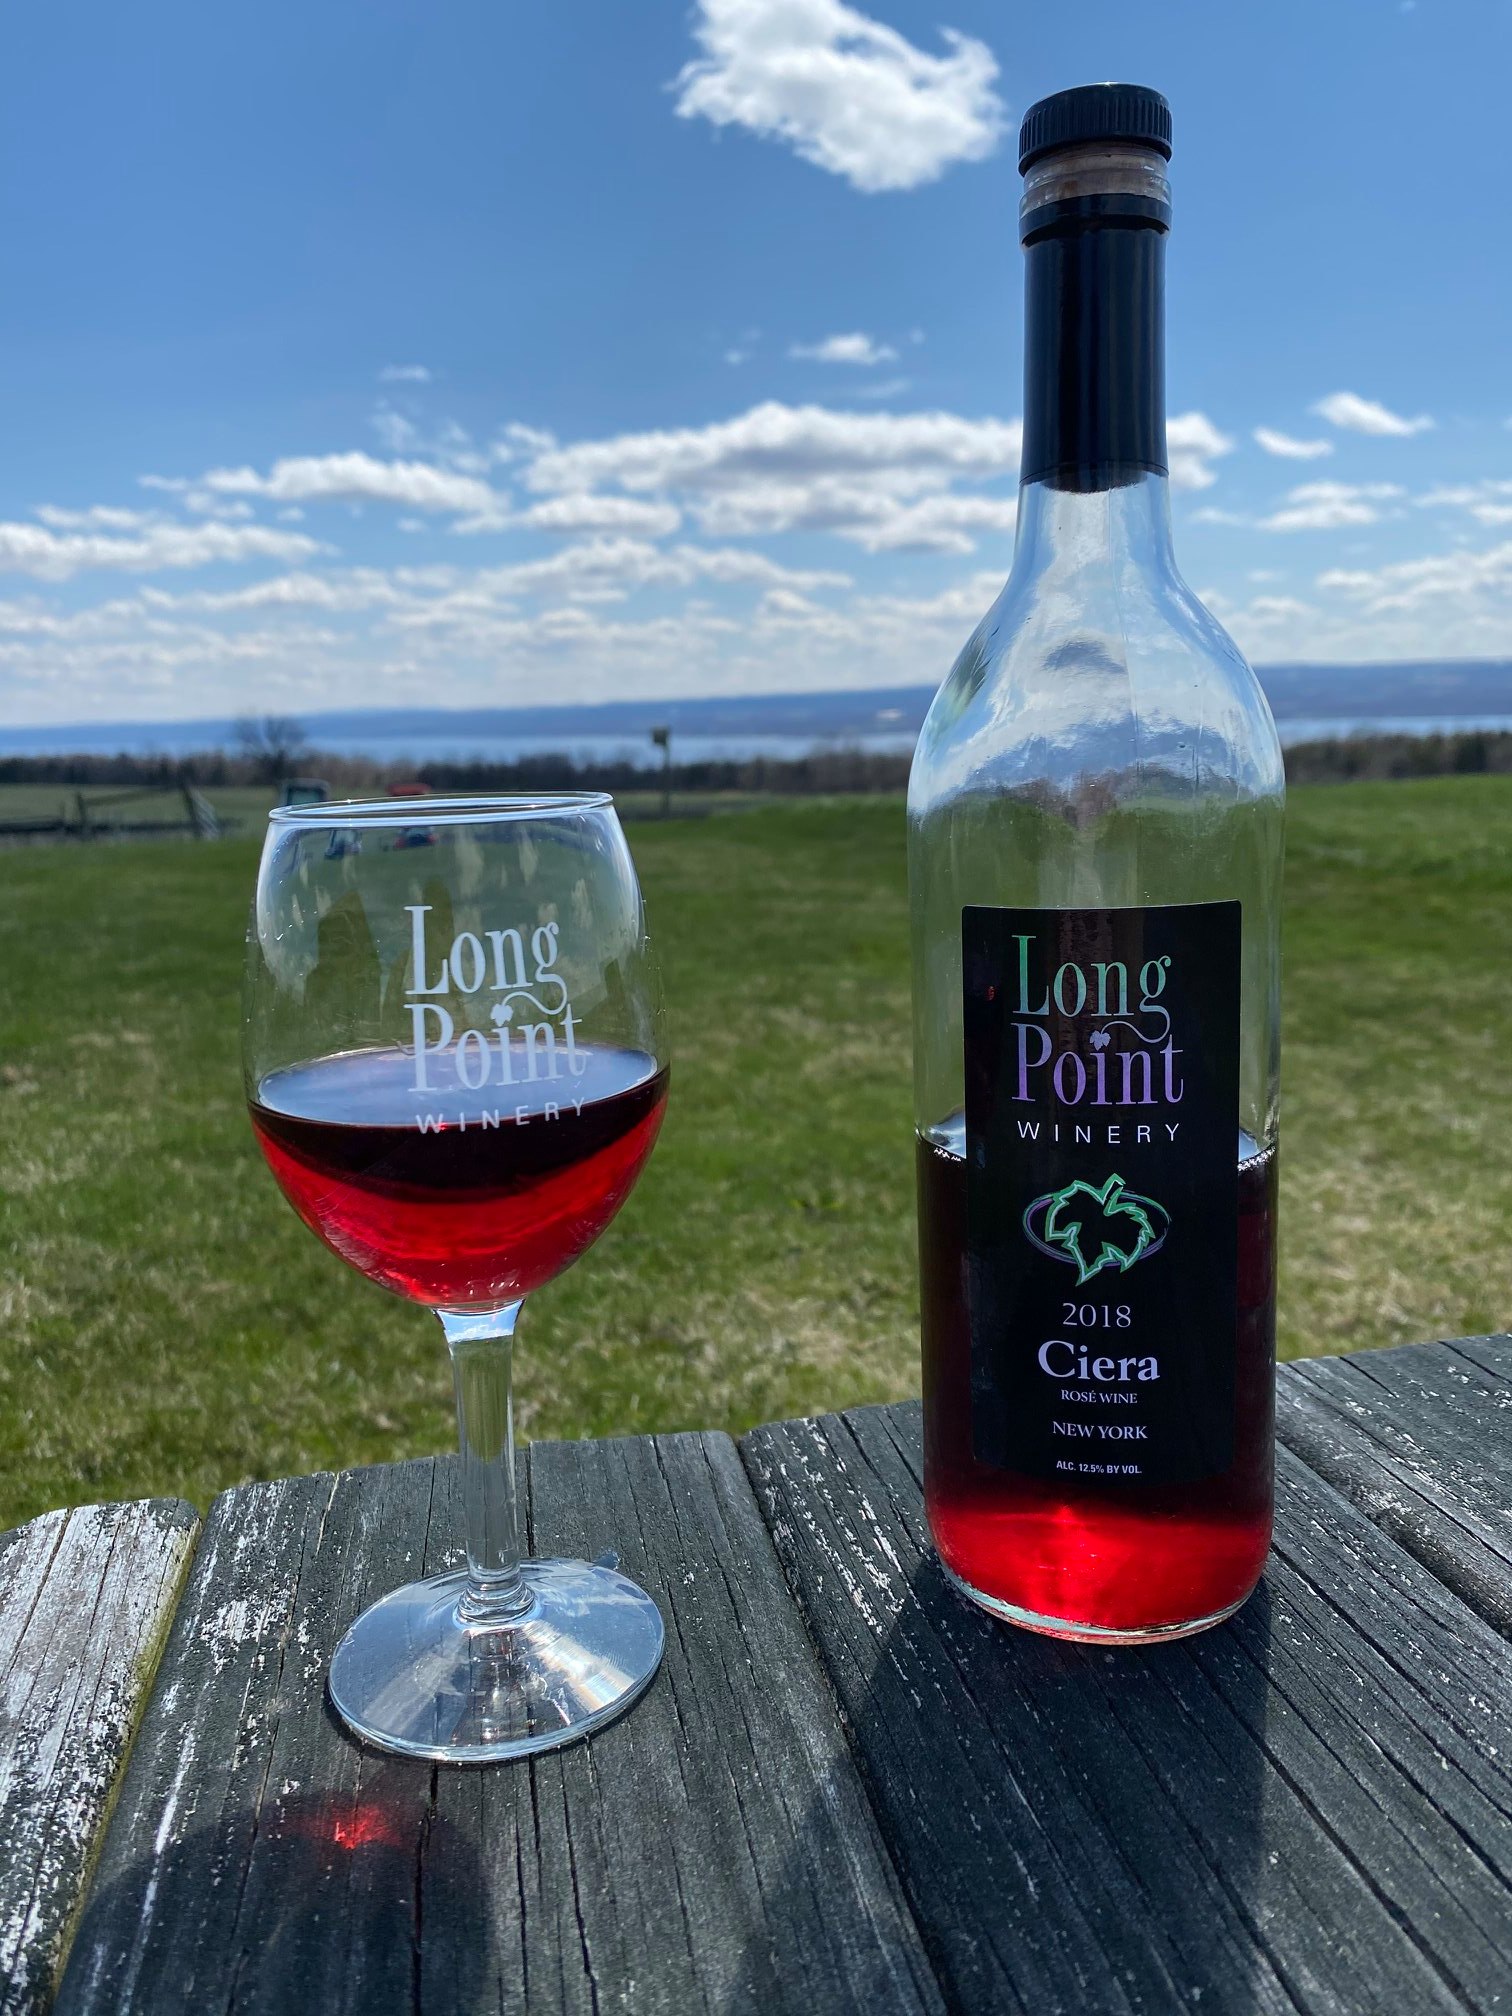 Long Point Winery